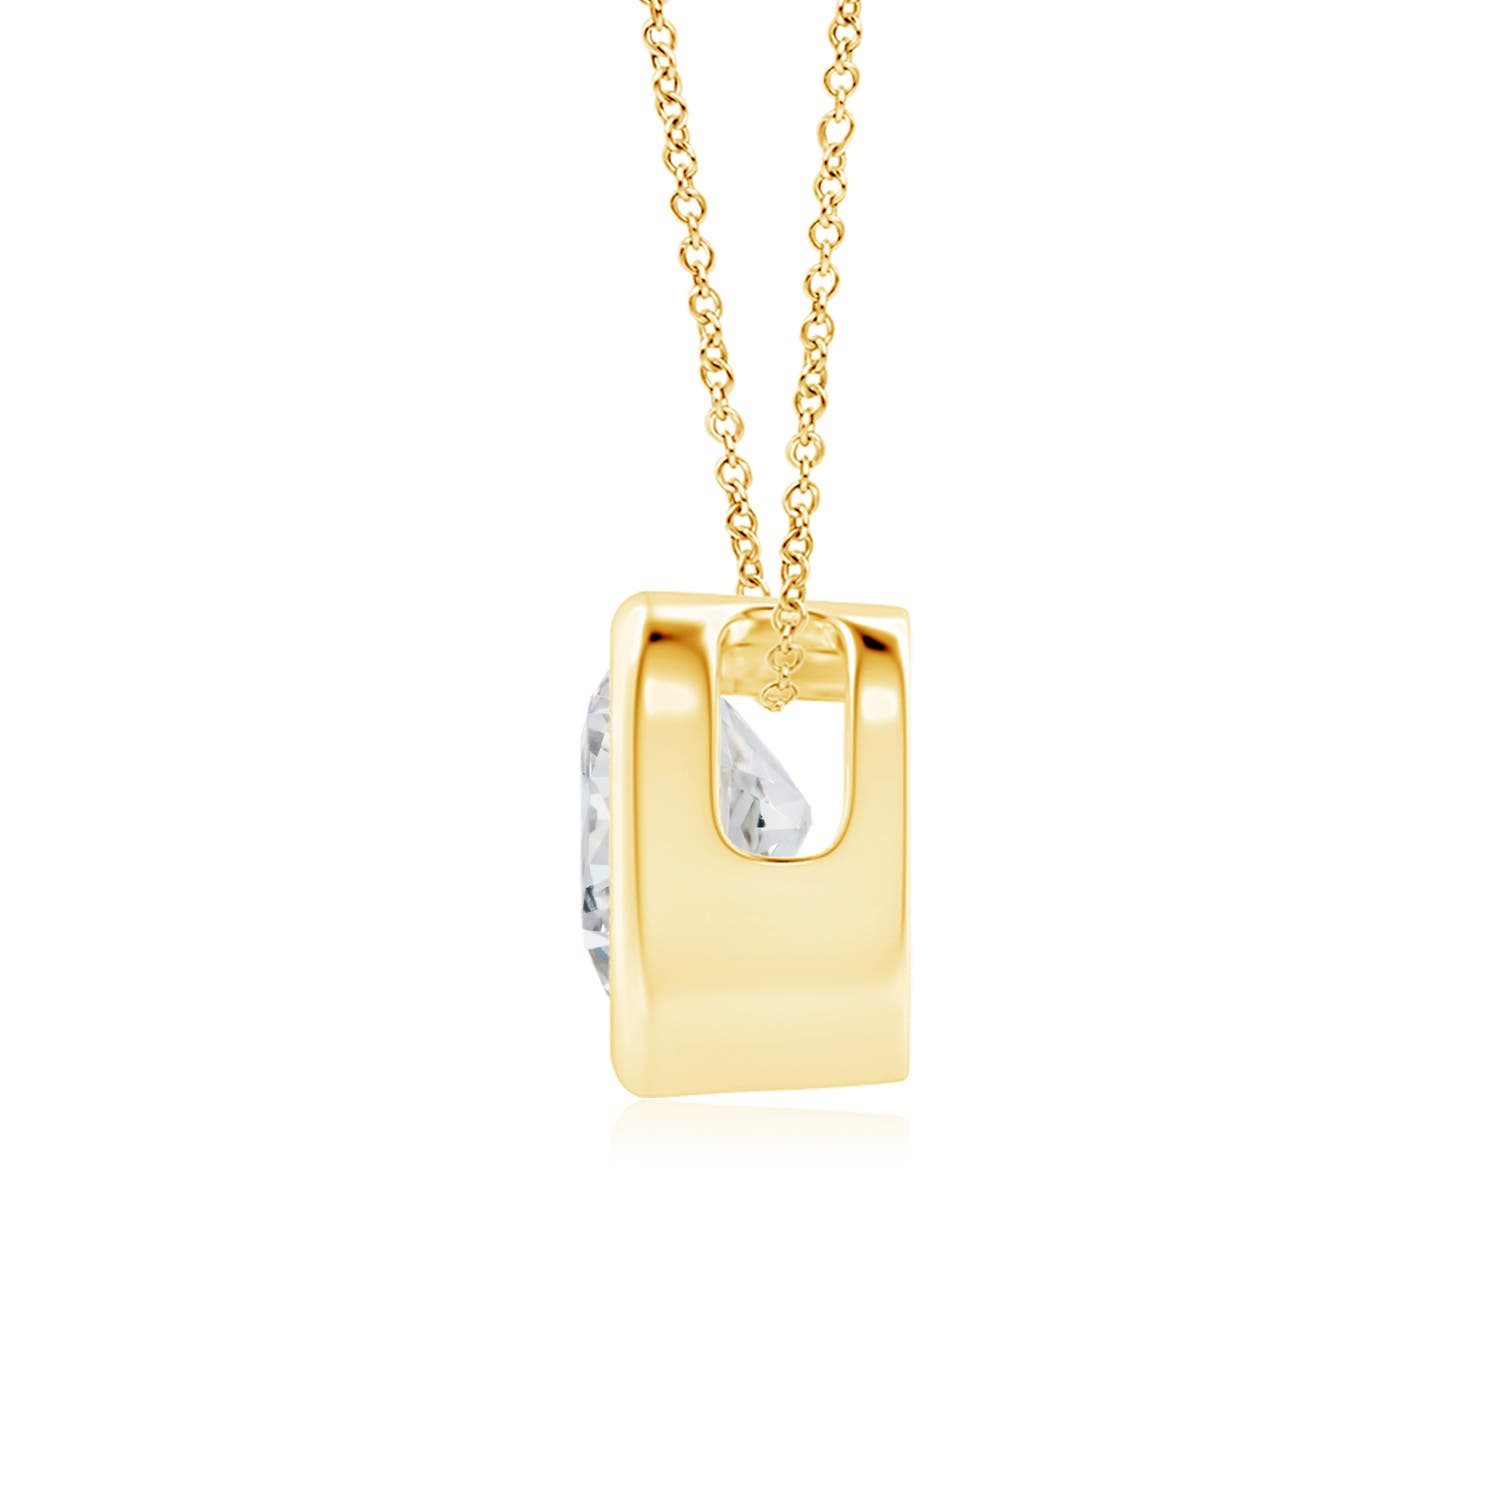 H, SI2 / 0.5 CT / 14 KT Yellow Gold